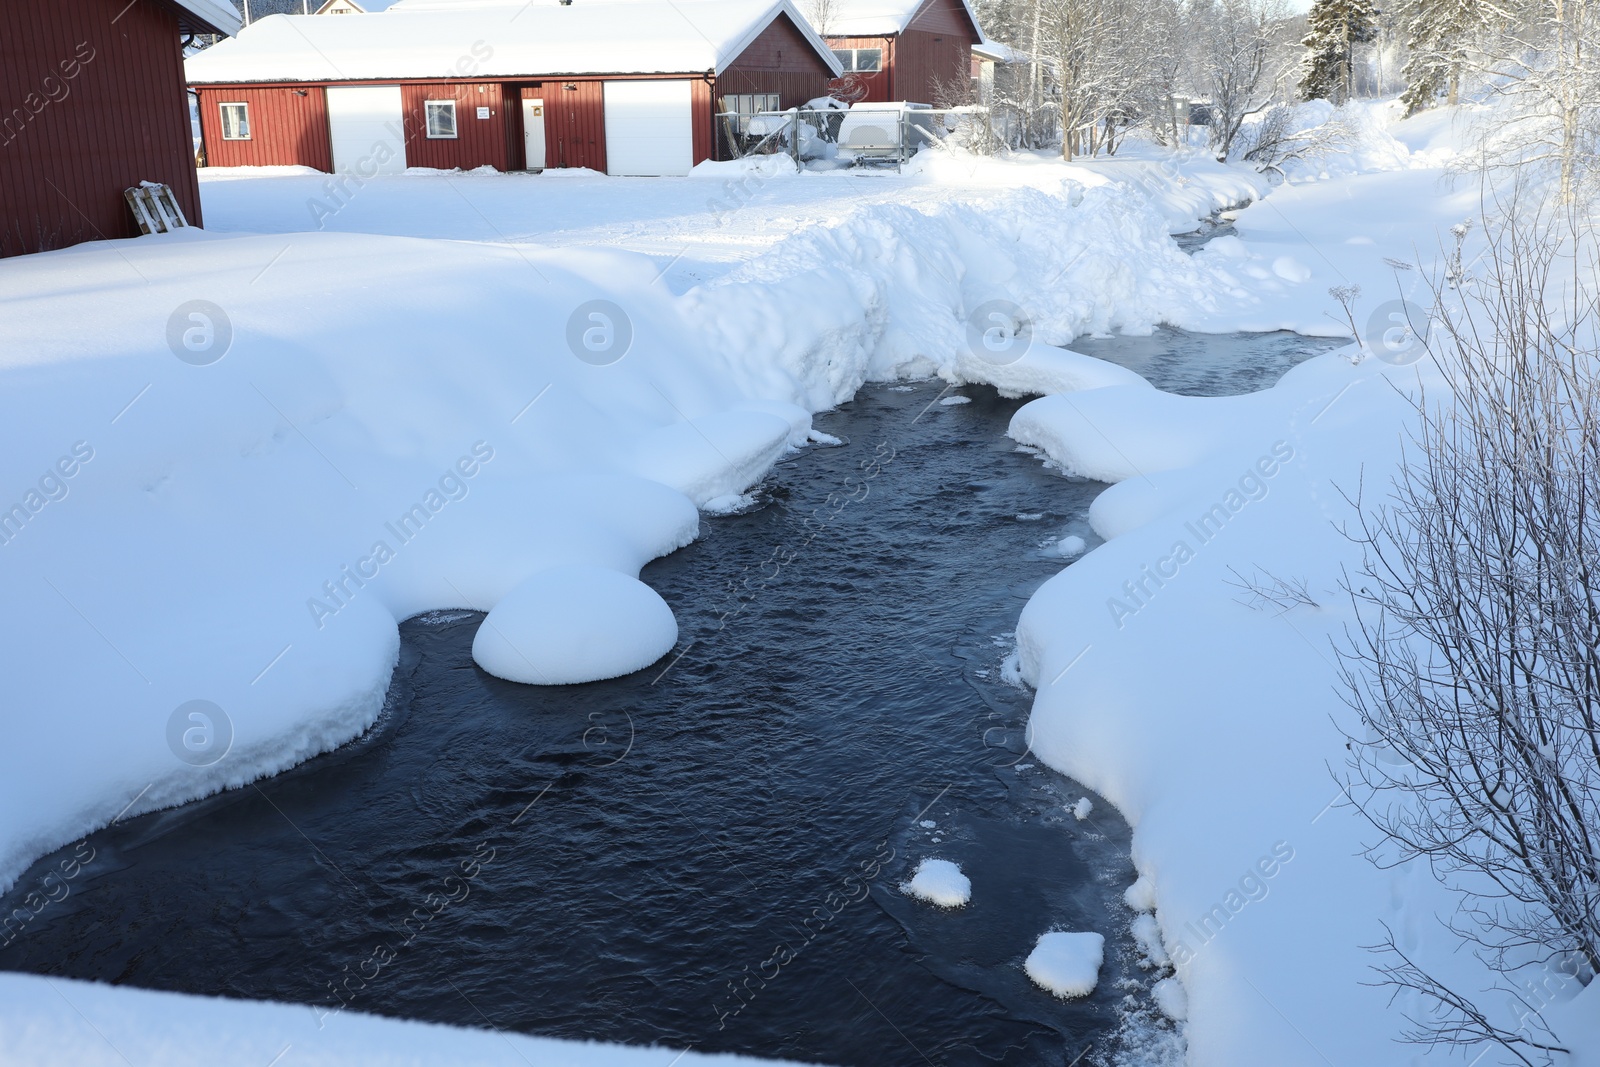 Photo of Picturesque view of frozen pond and houses on snowy day. Winter landscape